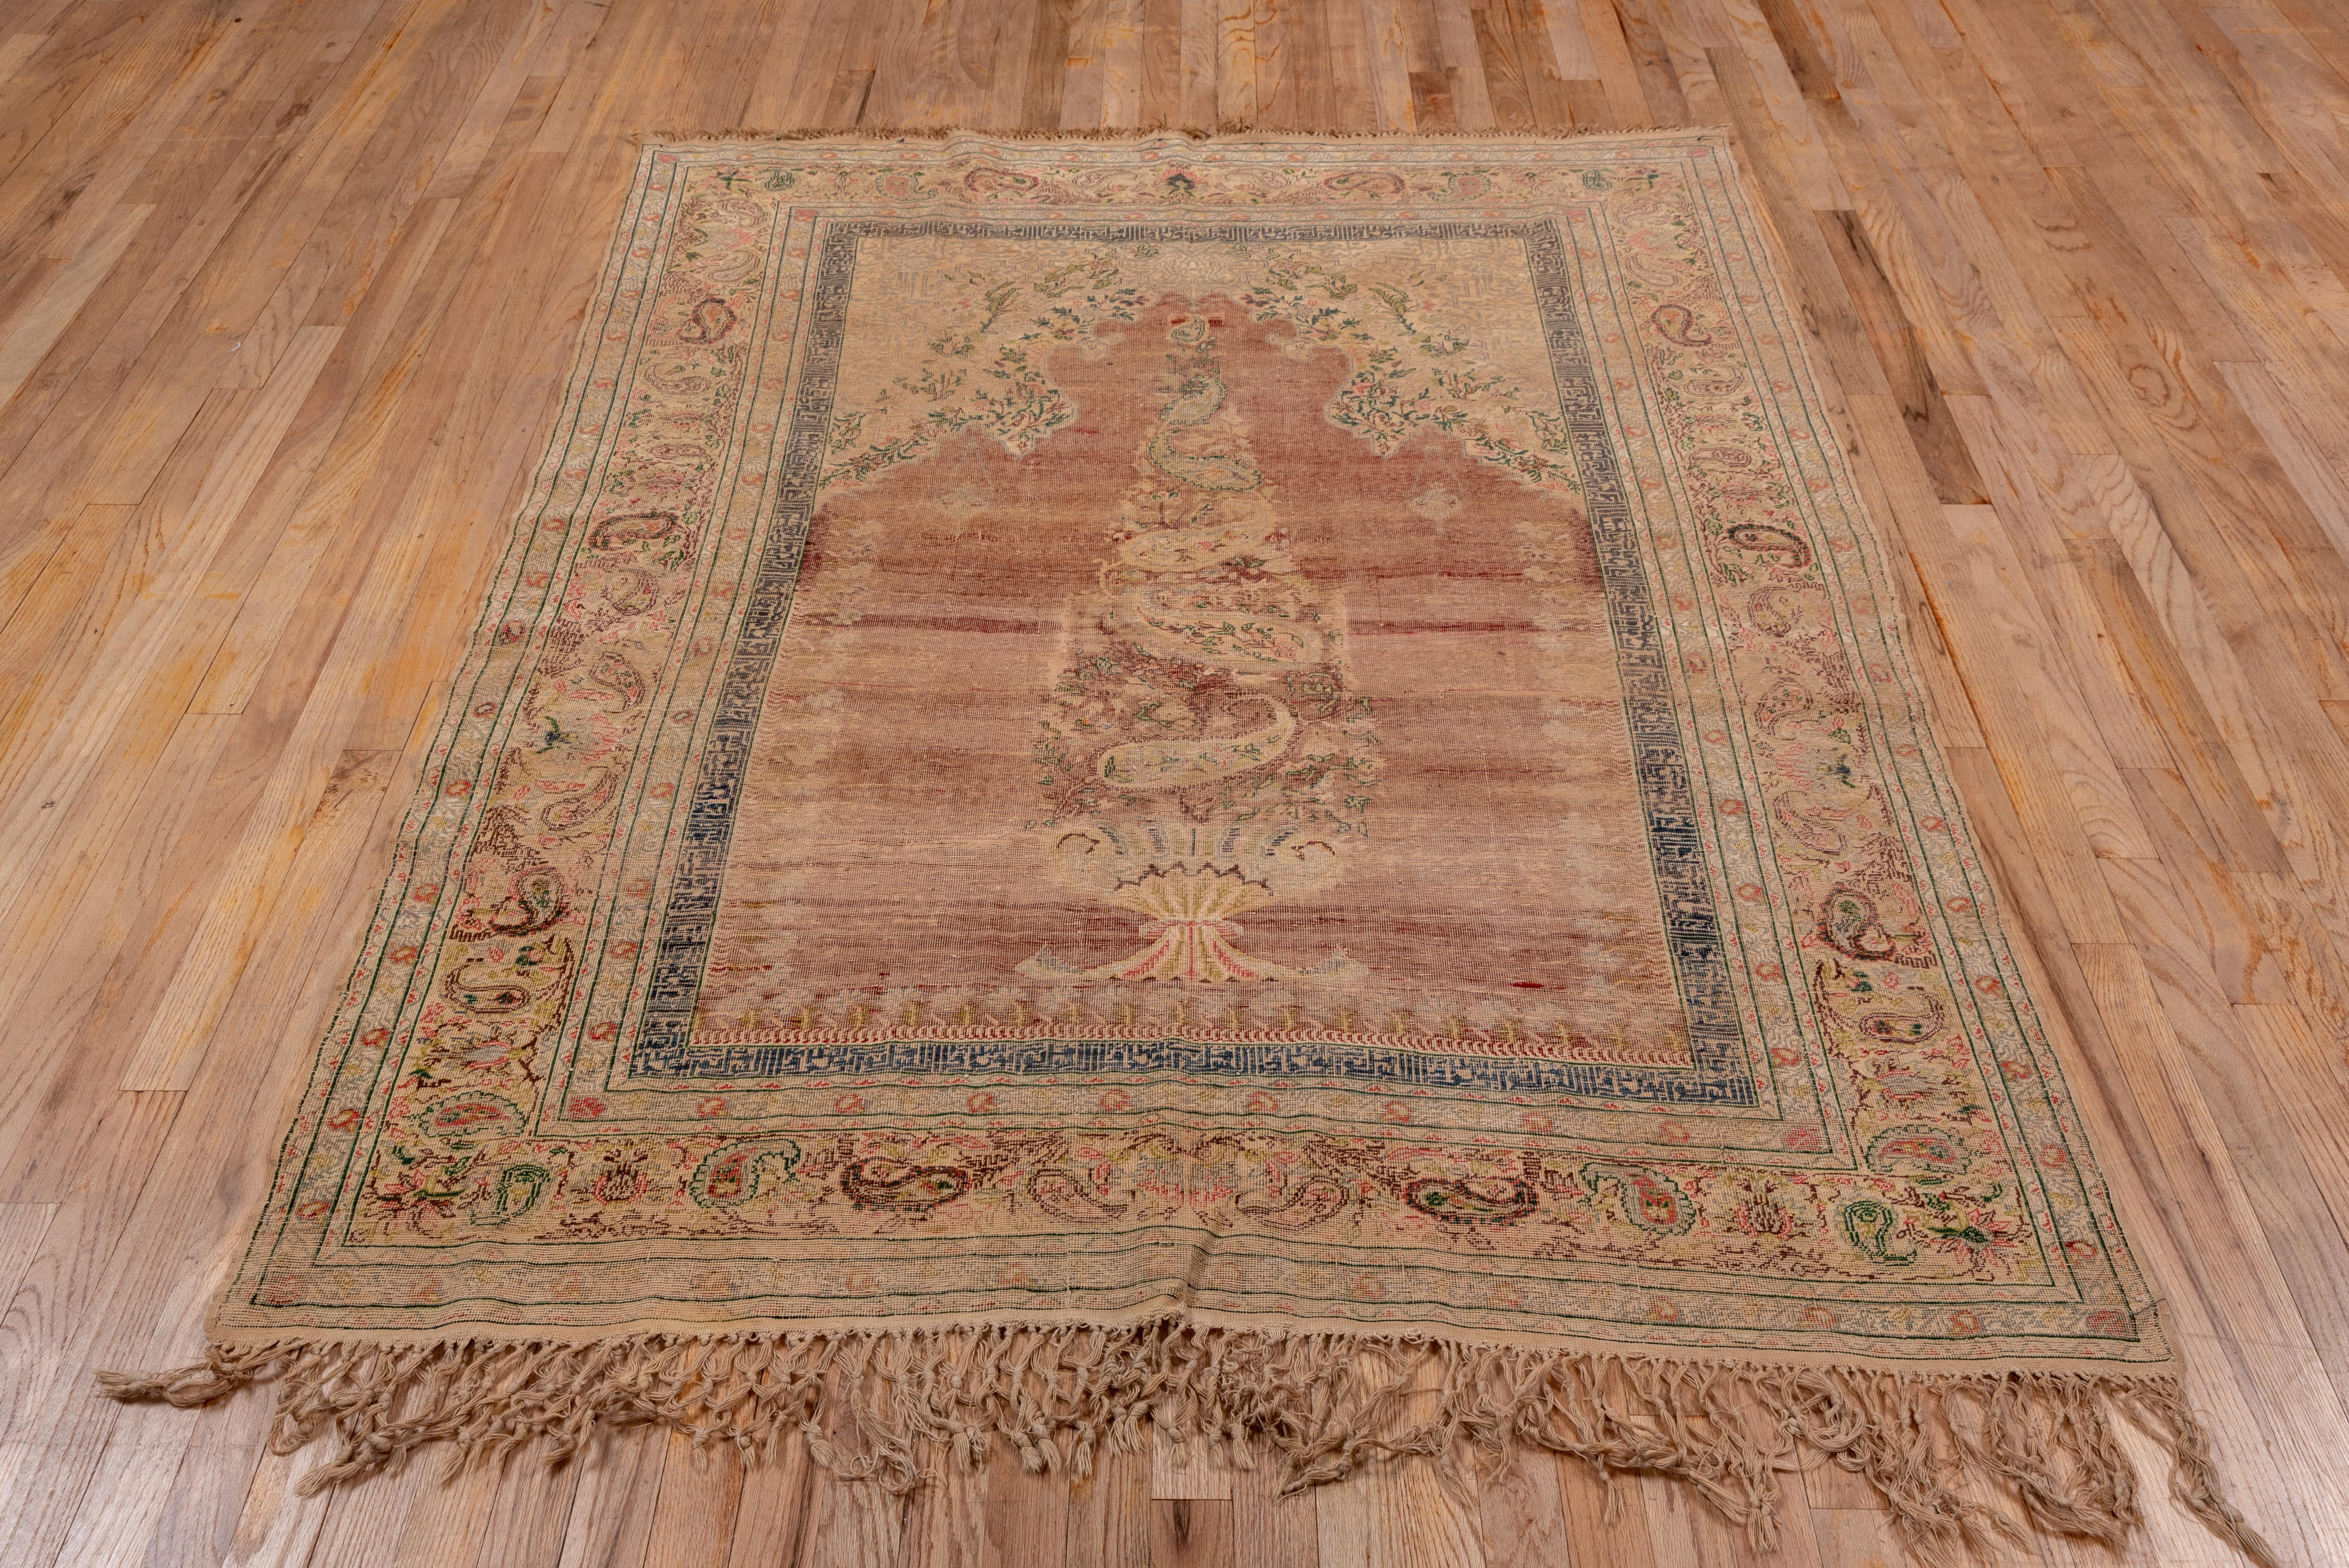 Early 20th Century Antique Pink Turkish Kaisary Rug, Formal Palette, Fringes